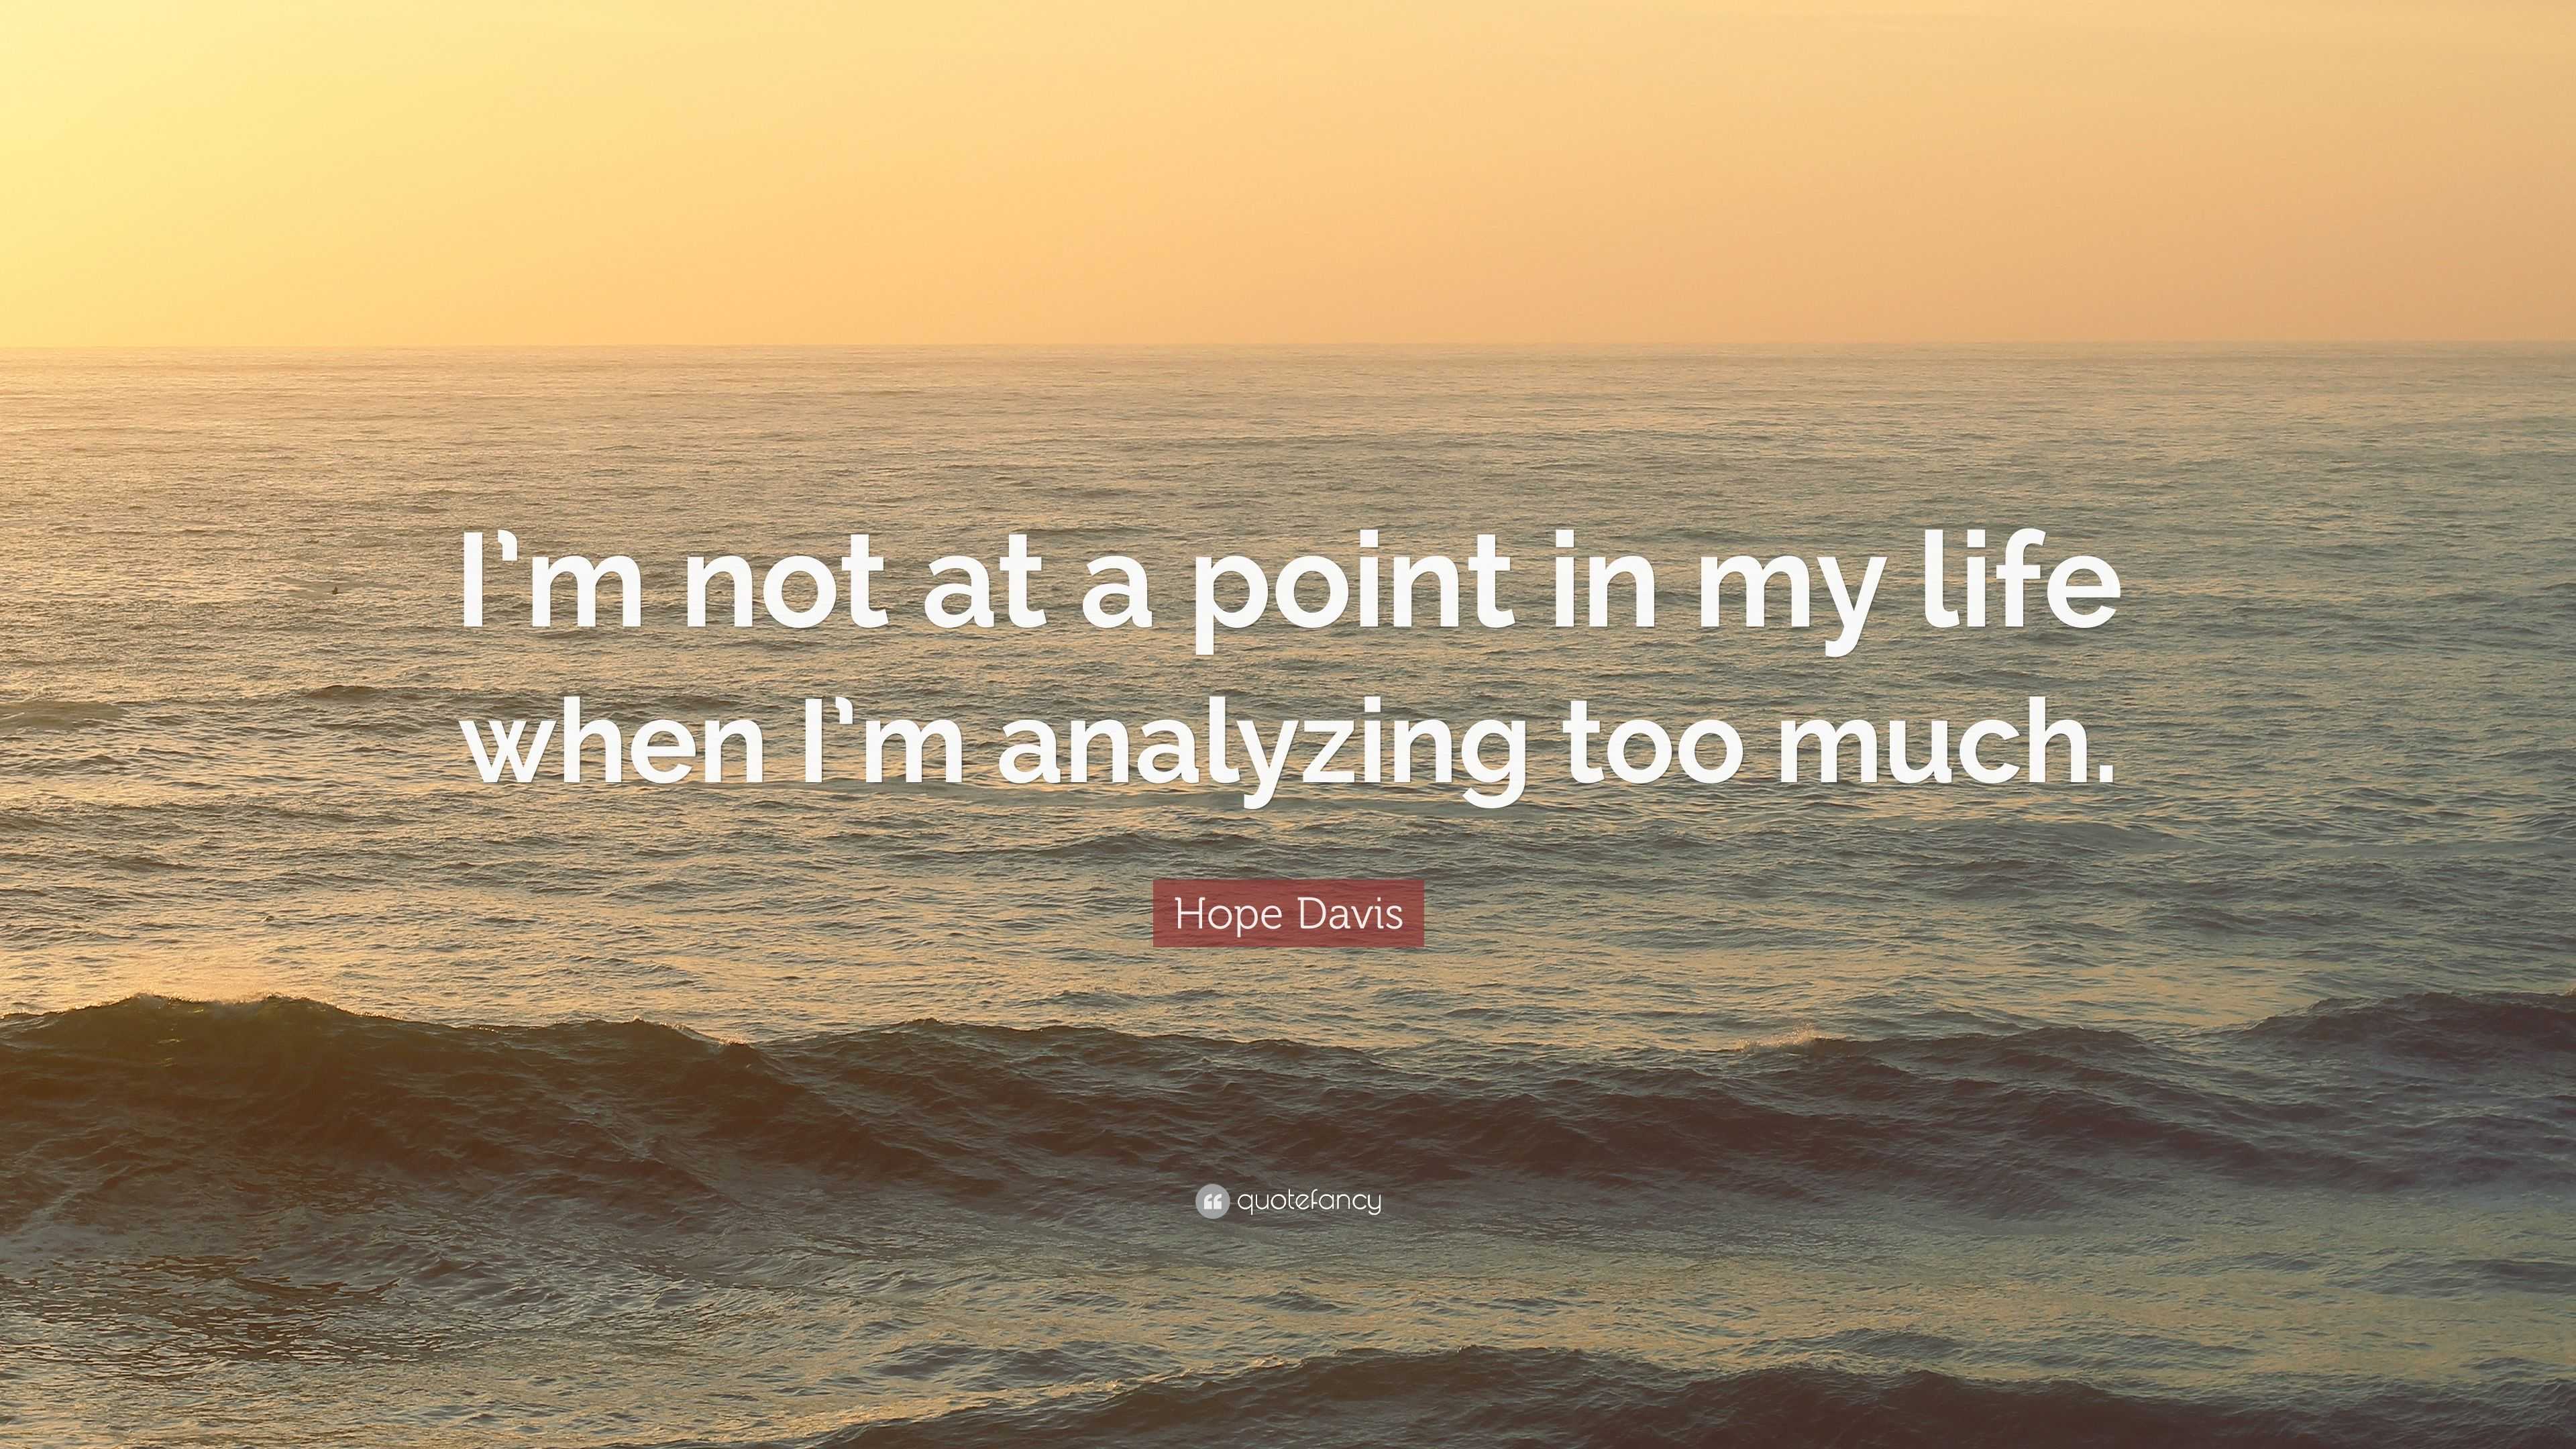 Hope Davis Quote: “I’m not at a point in my life when I’m analyzing too ...